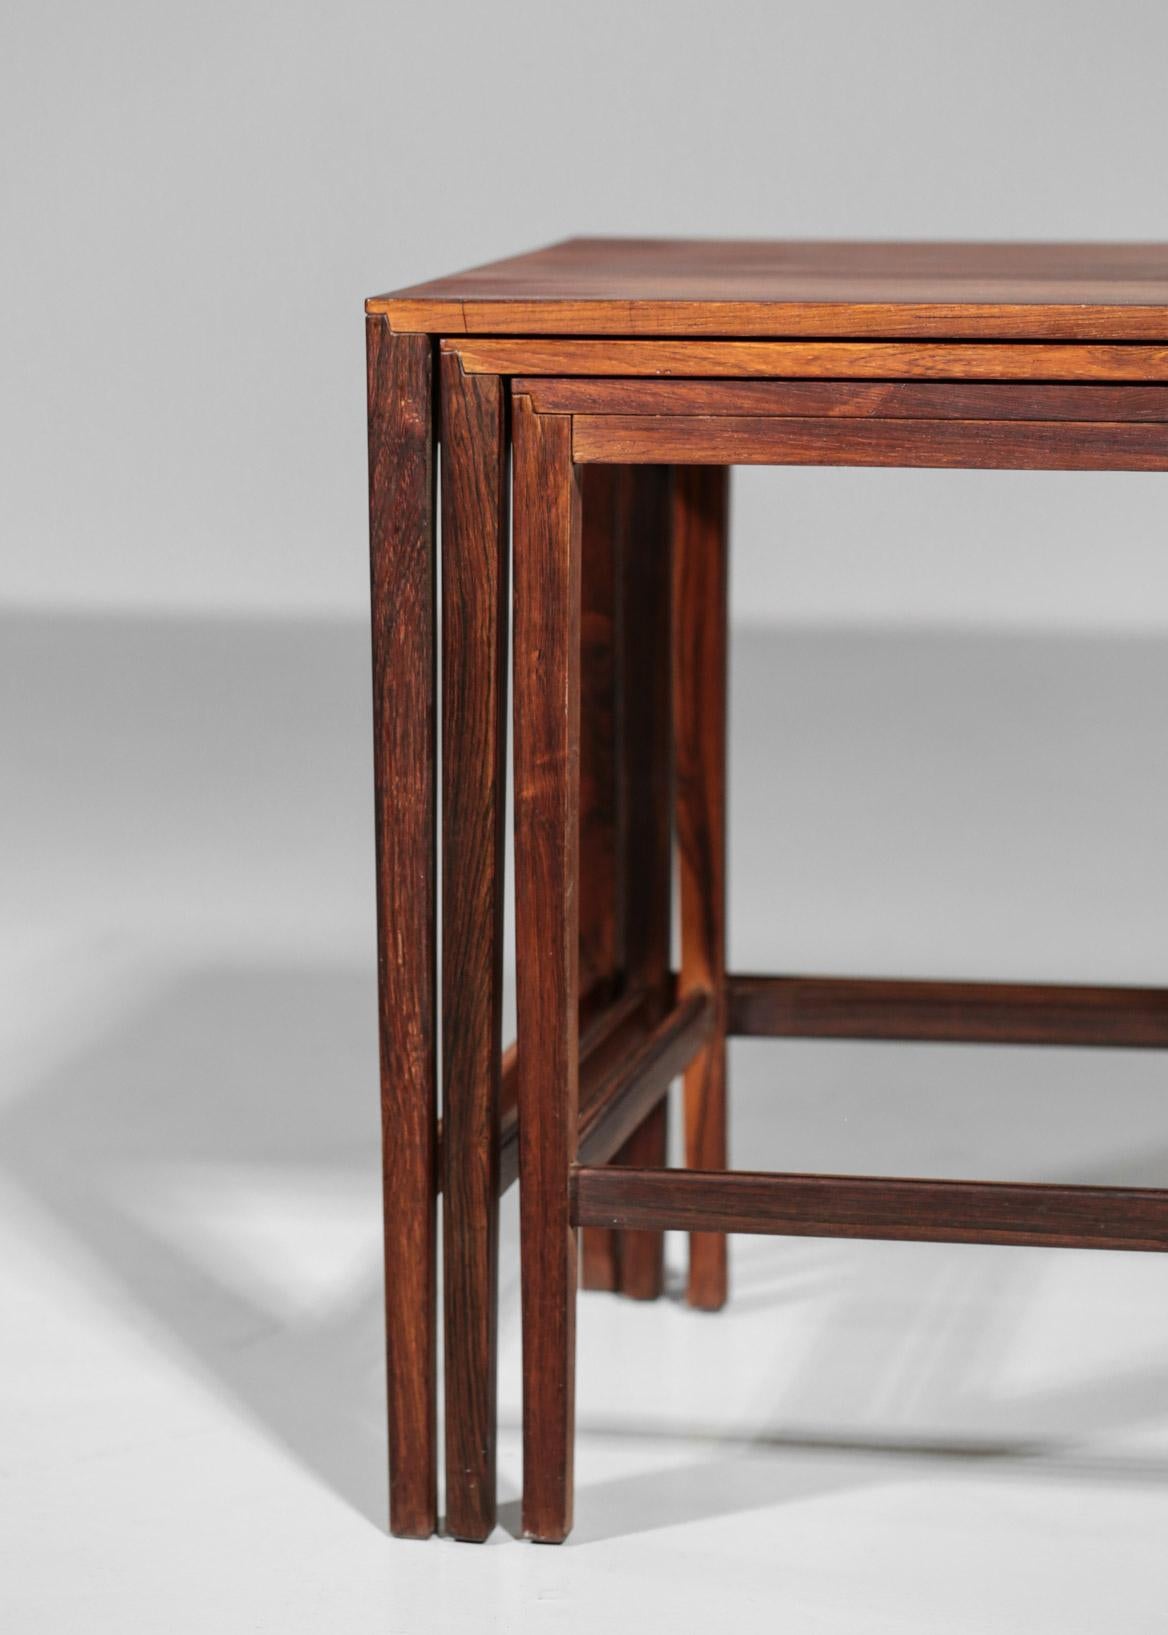 Scandinavian Nesting Tables in Rosewood 1960s Danish In Excellent Condition For Sale In Lyon, FR